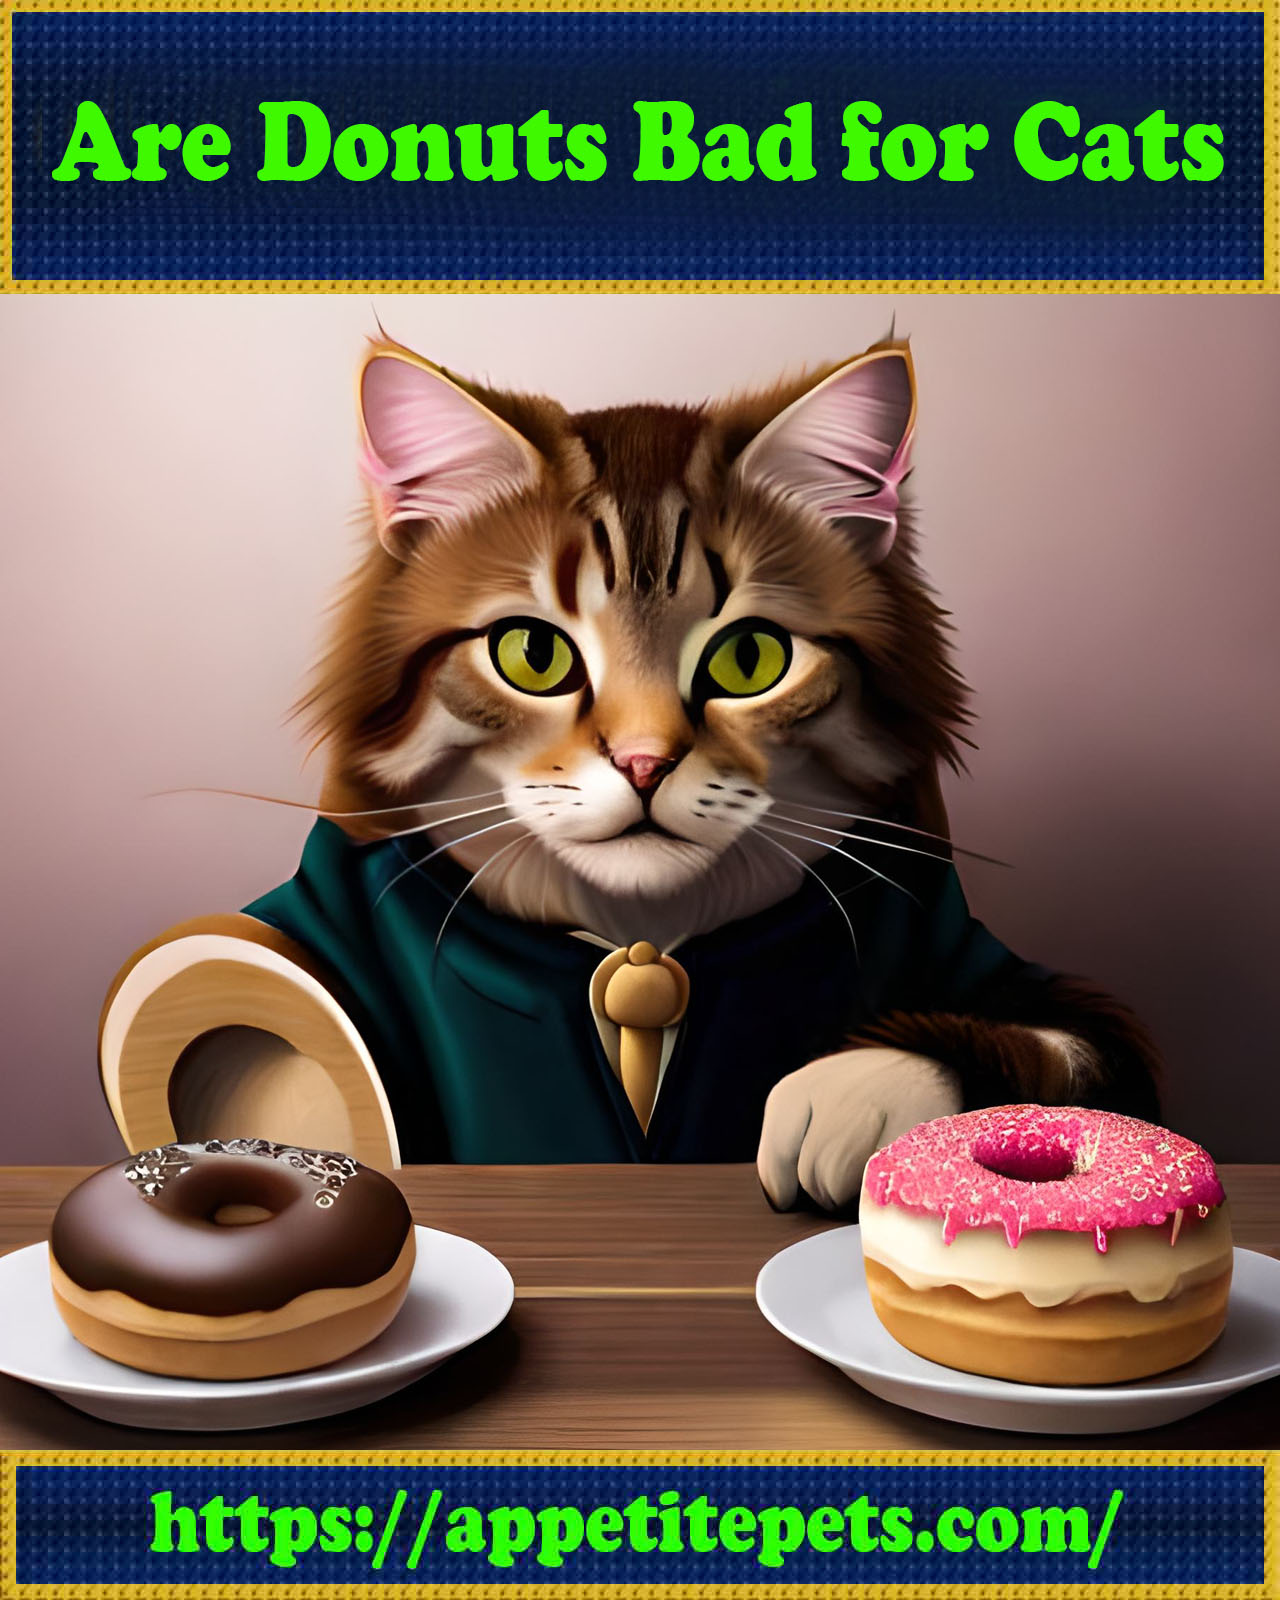 Are Donuts Bad for Cats